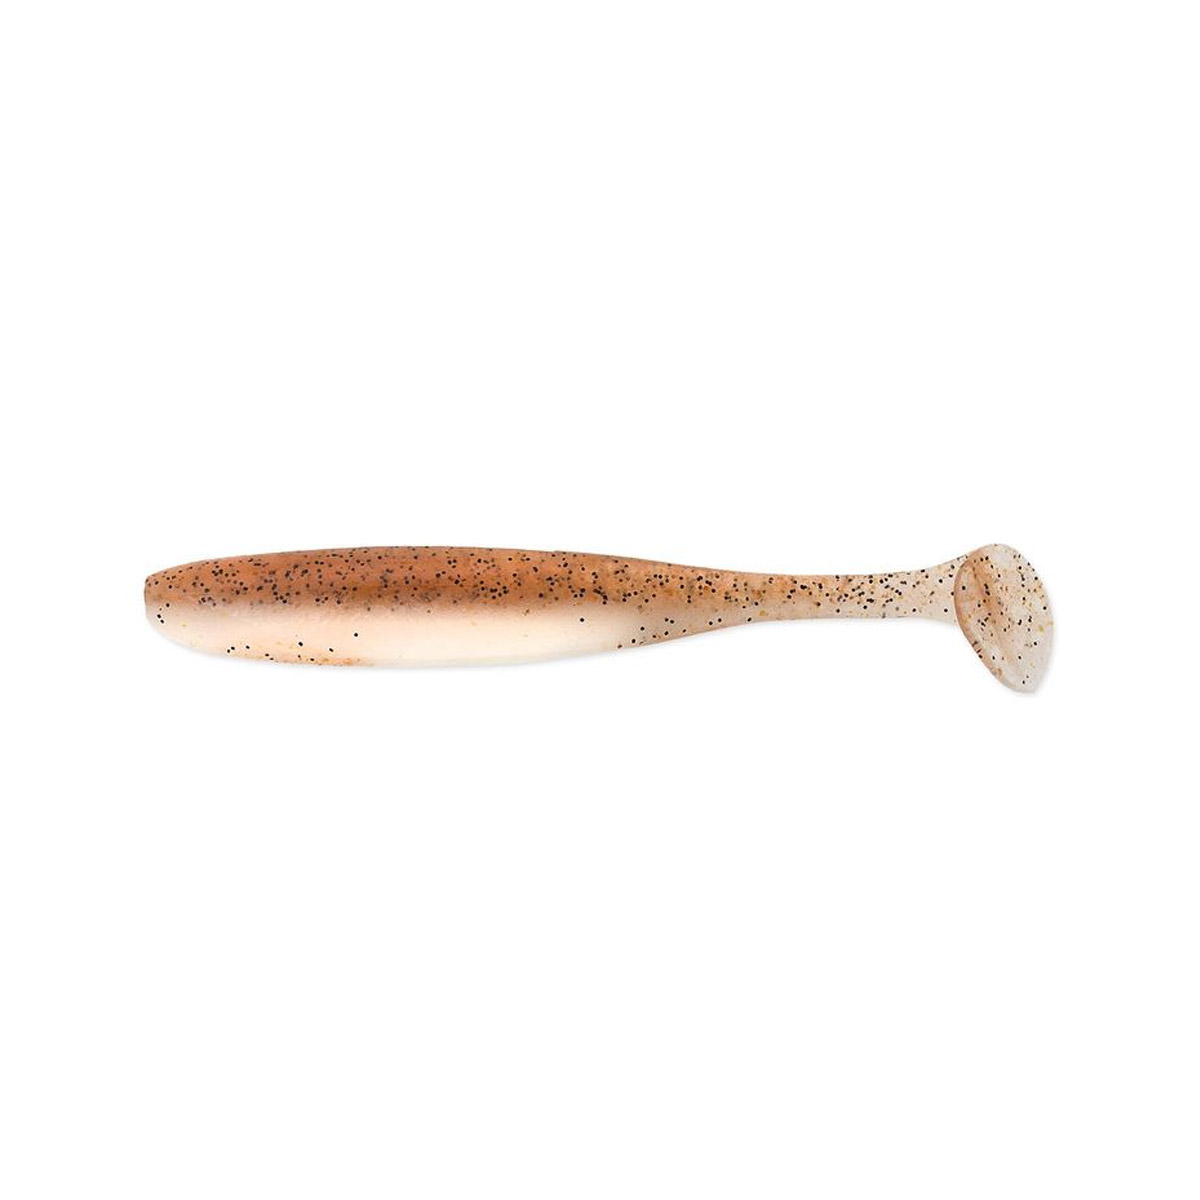 Keitech Easy Shiner 2 inch -  Natural Craw